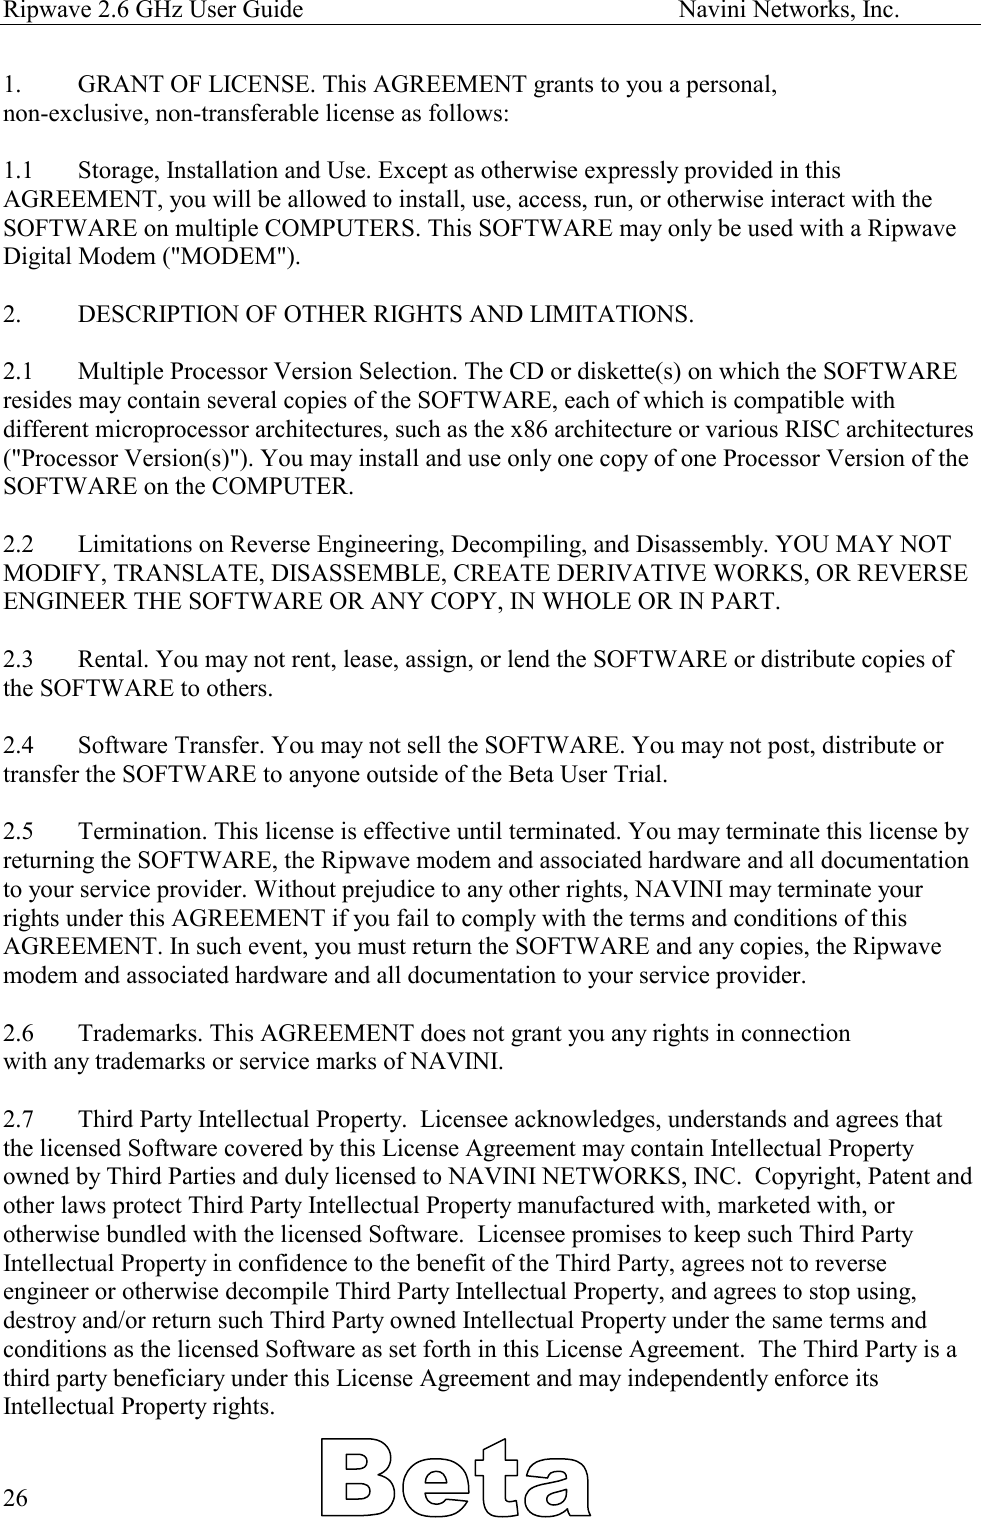 Ripwave 2.6 GHz User Guide                                                            Navini Networks, Inc. 1.  GRANT OF LICENSE. This AGREEMENT grants to you a personal,  non-exclusive, non-transferable license as follows:   1.1  Storage, Installation and Use. Except as otherwise expressly provided in this AGREEMENT, you will be allowed to install, use, access, run, or otherwise interact with the SOFTWARE on multiple COMPUTERS. This SOFTWARE may only be used with a Ripwave Digital Modem (&quot;MODEM&quot;).  2.   DESCRIPTION OF OTHER RIGHTS AND LIMITATIONS.   2.1   Multiple Processor Version Selection. The CD or diskette(s) on which the SOFTWARE resides may contain several copies of the SOFTWARE, each of which is compatible with different microprocessor architectures, such as the x86 architecture or various RISC architectures (&quot;Processor Version(s)&quot;). You may install and use only one copy of one Processor Version of the SOFTWARE on the COMPUTER.  2.2   Limitations on Reverse Engineering, Decompiling, and Disassembly. YOU MAY NOT MODIFY, TRANSLATE, DISASSEMBLE, CREATE DERIVATIVE WORKS, OR REVERSE ENGINEER THE SOFTWARE OR ANY COPY, IN WHOLE OR IN PART.  2.3   Rental. You may not rent, lease, assign, or lend the SOFTWARE or distribute copies of the SOFTWARE to others.  2.4   Software Transfer. You may not sell the SOFTWARE. You may not post, distribute or transfer the SOFTWARE to anyone outside of the Beta User Trial.  2.5   Termination. This license is effective until terminated. You may terminate this license by returning the SOFTWARE, the Ripwave modem and associated hardware and all documentation to your service provider. Without prejudice to any other rights, NAVINI may terminate your rights under this AGREEMENT if you fail to comply with the terms and conditions of this AGREEMENT. In such event, you must return the SOFTWARE and any copies, the Ripwave modem and associated hardware and all documentation to your service provider.  2.6  Trademarks. This AGREEMENT does not grant you any rights in connection with any trademarks or service marks of NAVINI.  2.7  Third Party Intellectual Property.  Licensee acknowledges, understands and agrees that the licensed Software covered by this License Agreement may contain Intellectual Property owned by Third Parties and duly licensed to NAVINI NETWORKS, INC.  Copyright, Patent and other laws protect Third Party Intellectual Property manufactured with, marketed with, or otherwise bundled with the licensed Software.  Licensee promises to keep such Third Party Intellectual Property in confidence to the benefit of the Third Party, agrees not to reverse engineer or otherwise decompile Third Party Intellectual Property, and agrees to stop using, destroy and/or return such Third Party owned Intellectual Property under the same terms and conditions as the licensed Software as set forth in this License Agreement.  The Third Party is a third party beneficiary under this License Agreement and may independently enforce its Intellectual Property rights.    26